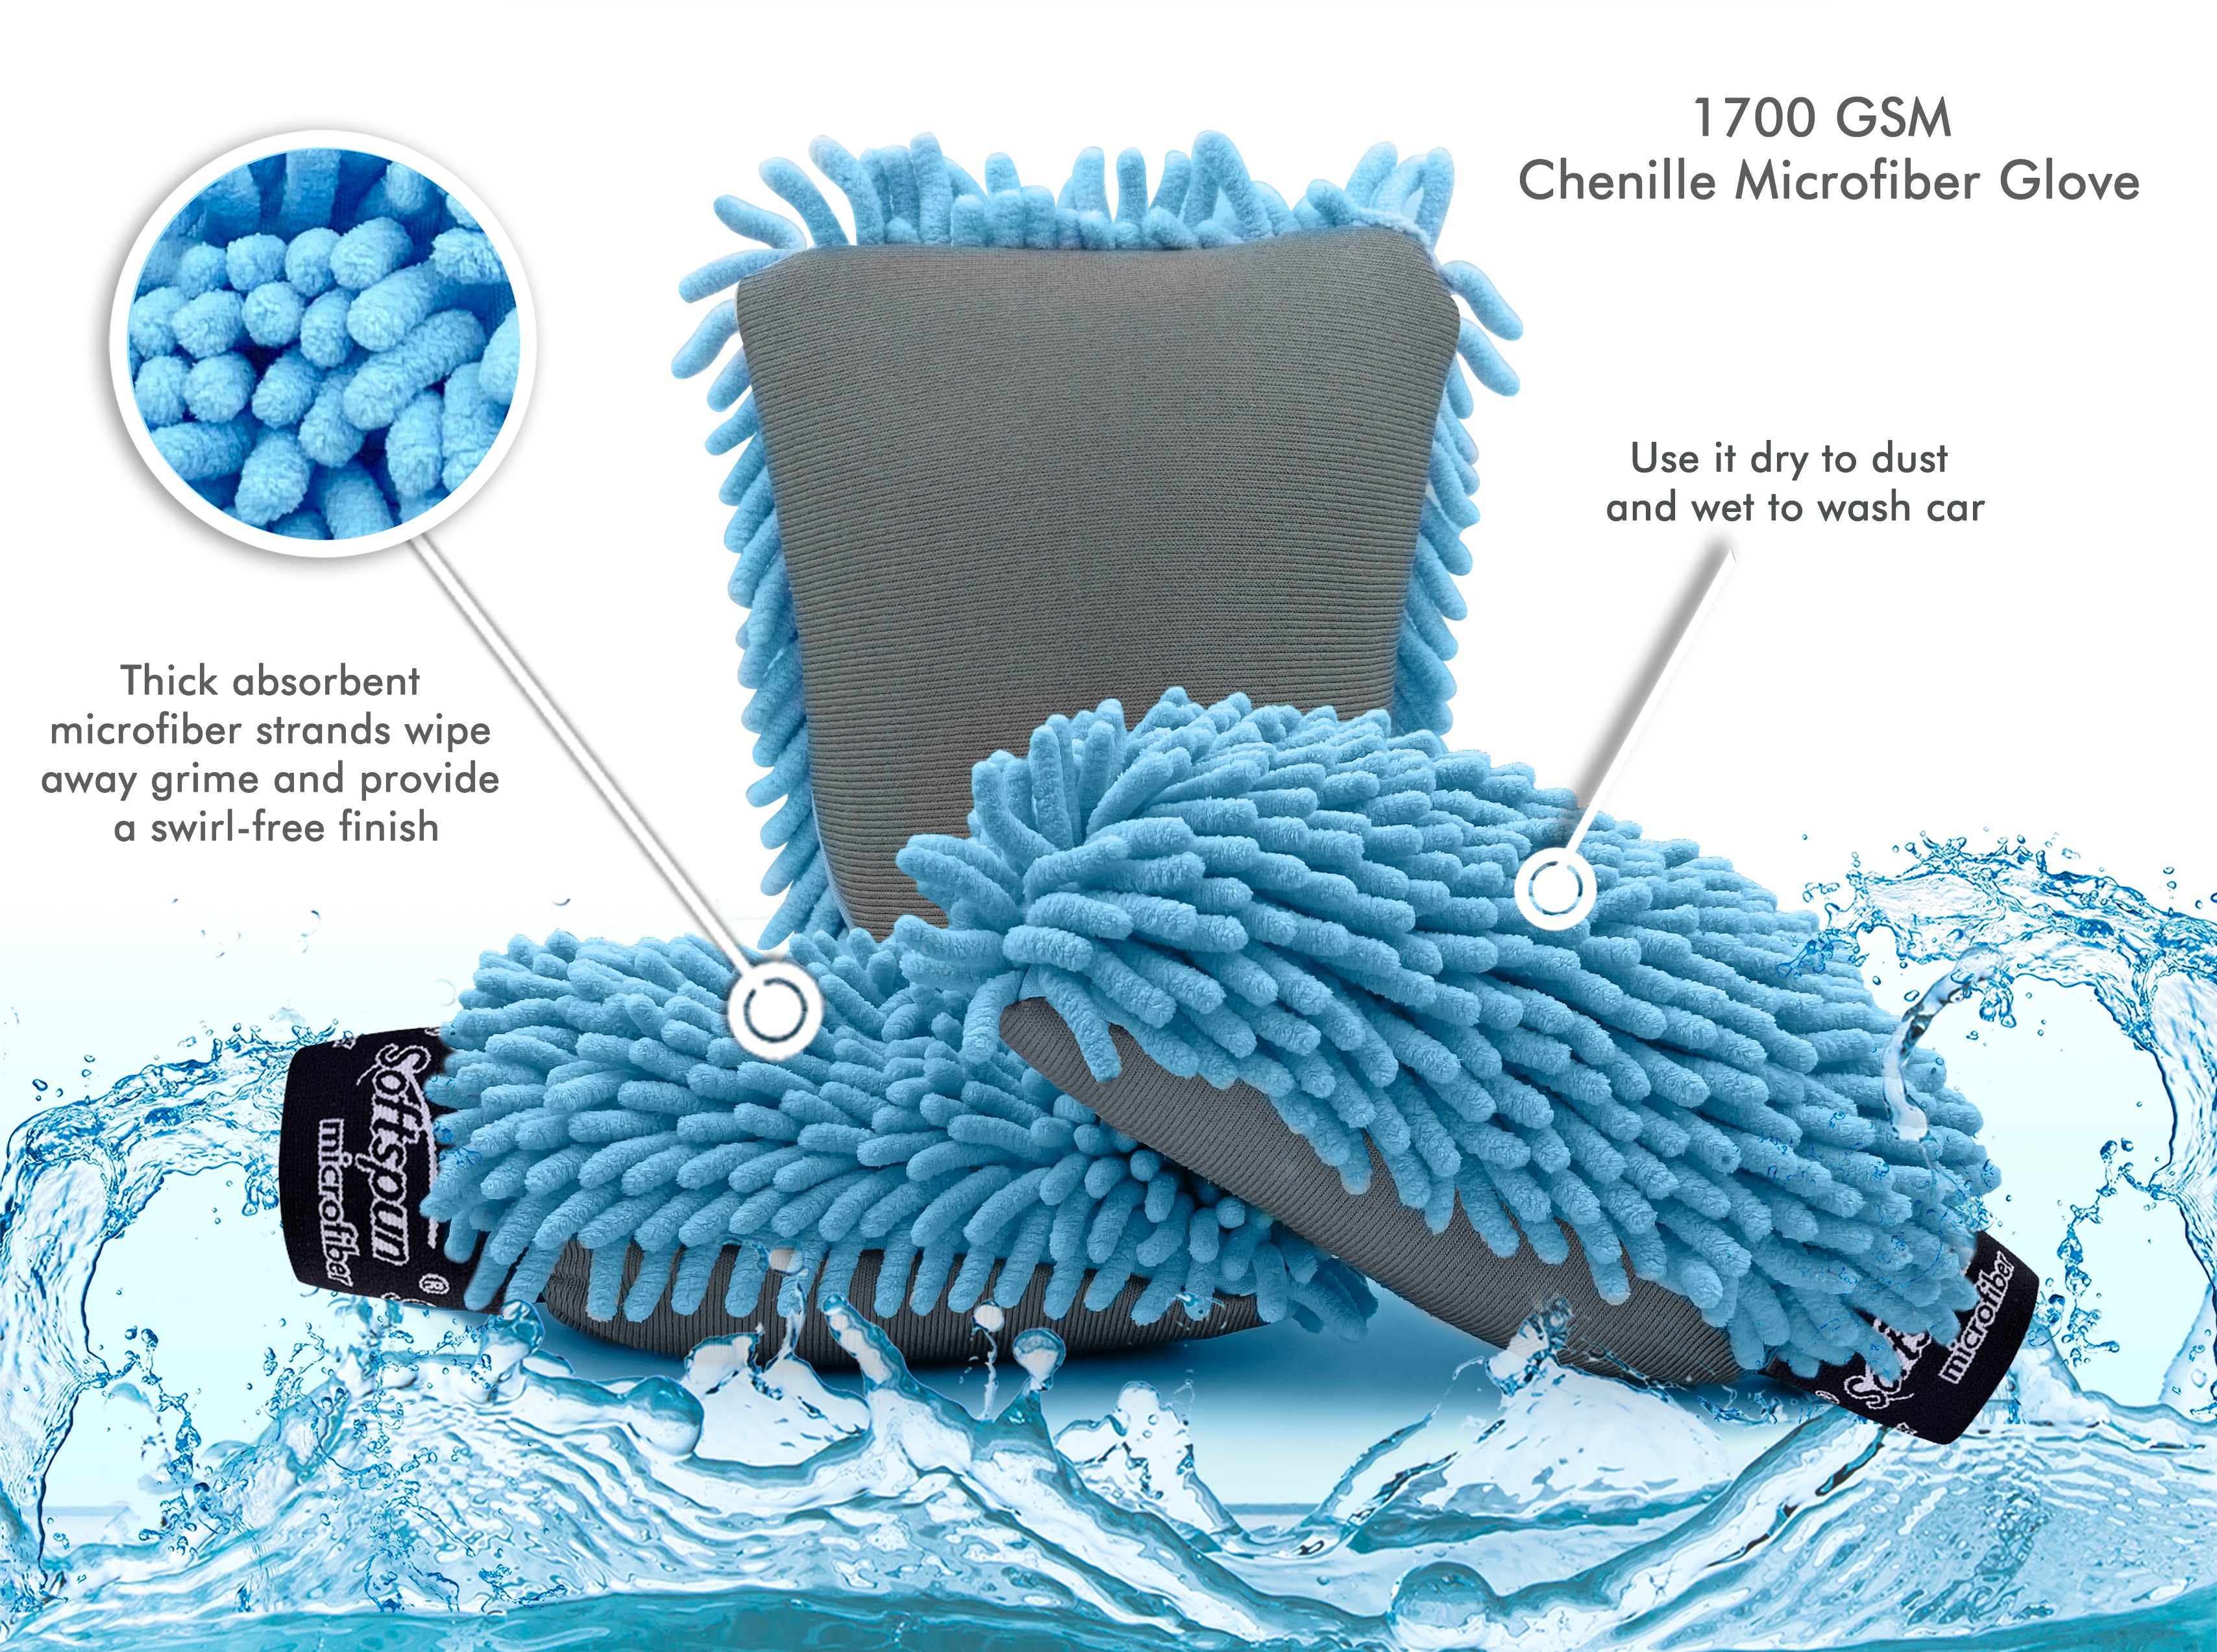 SOFTSPUN Microfiber Chenille & Glass Cloth Mitt, 3 Piece Combo 1700 GSM , Multi-Purpose Super Absorbent and Perfect Wash Clean with Lint-Scratch Free Home, Kitchen, Window, Dusting!